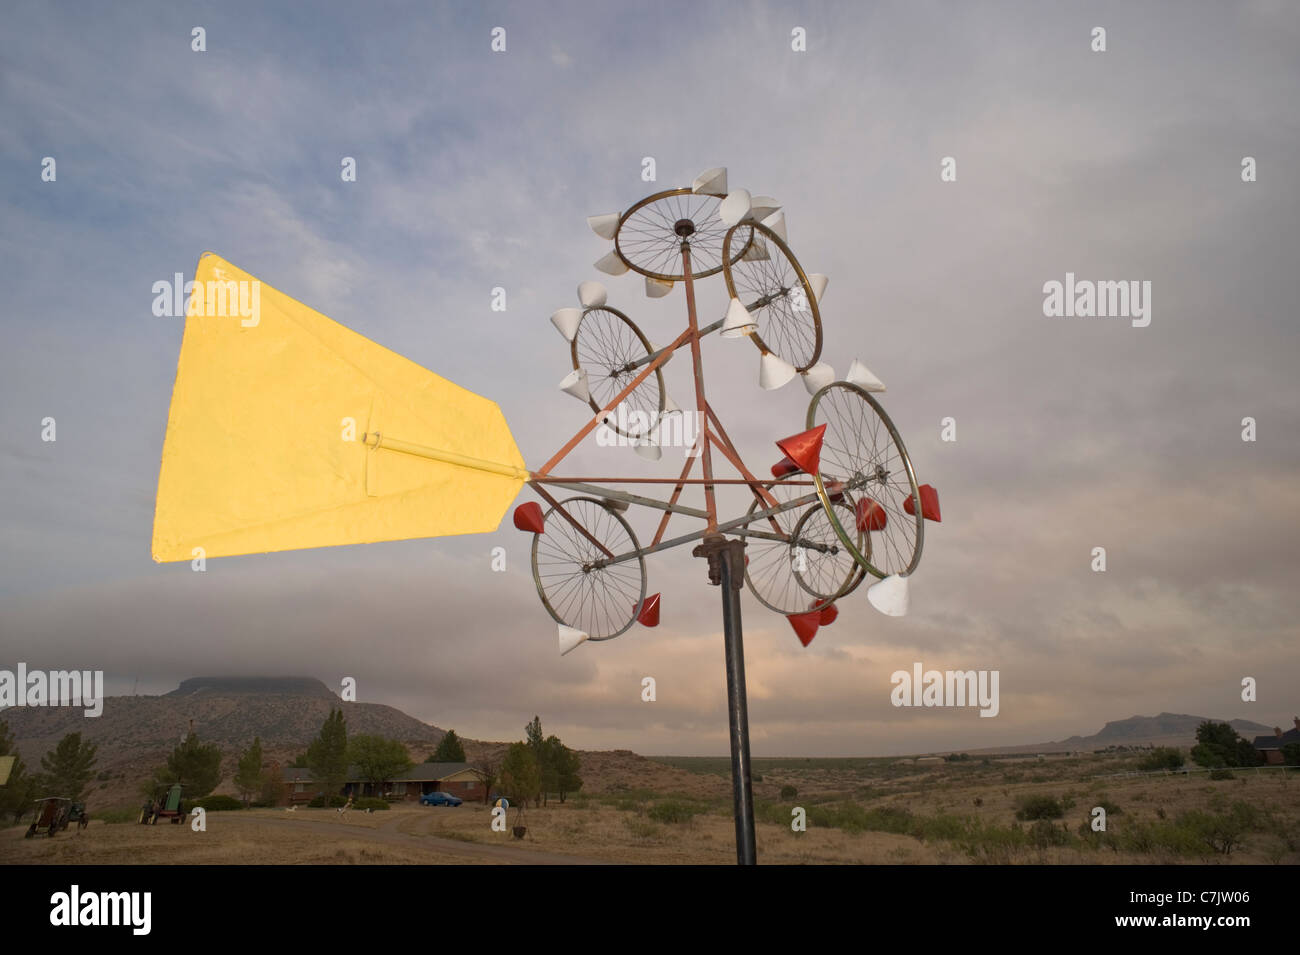 A whimsical whirligig art sculpture captures the eye on the outskirts of Tucumcari, New Mexico. Stock Photo